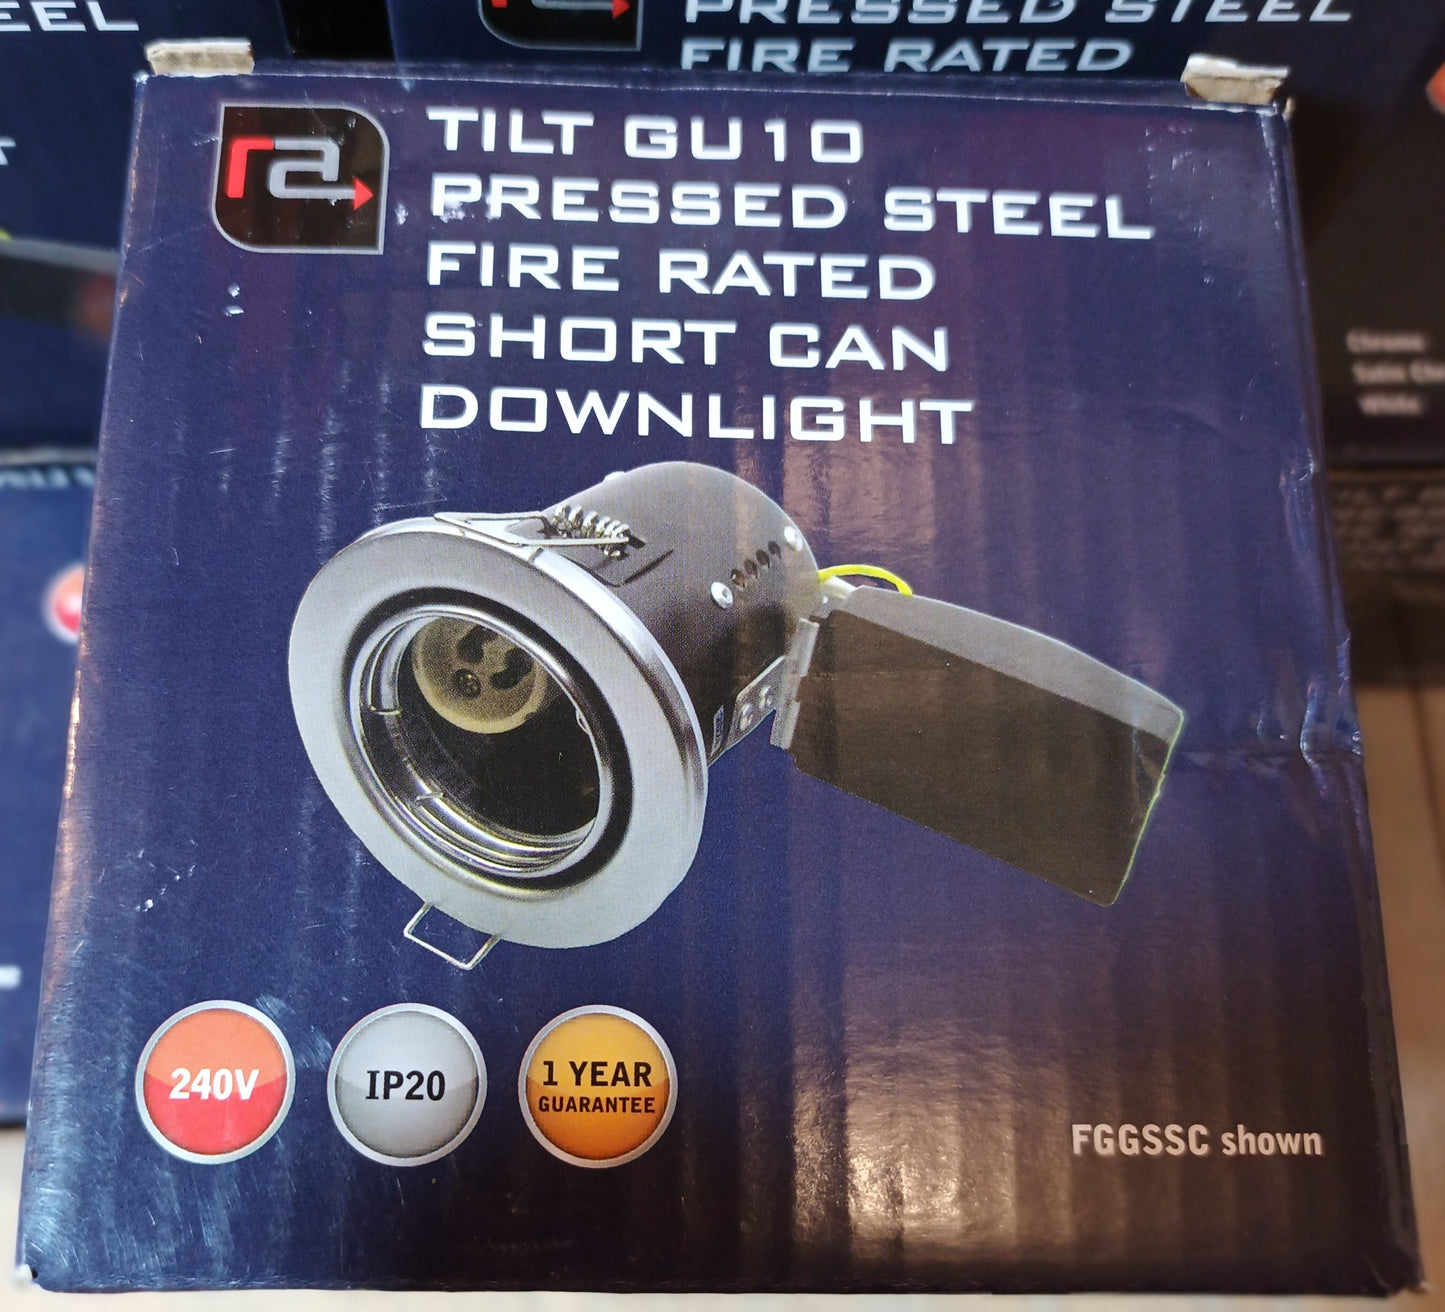 Fire Rated Gu10 Downlight Tilting In Chrome